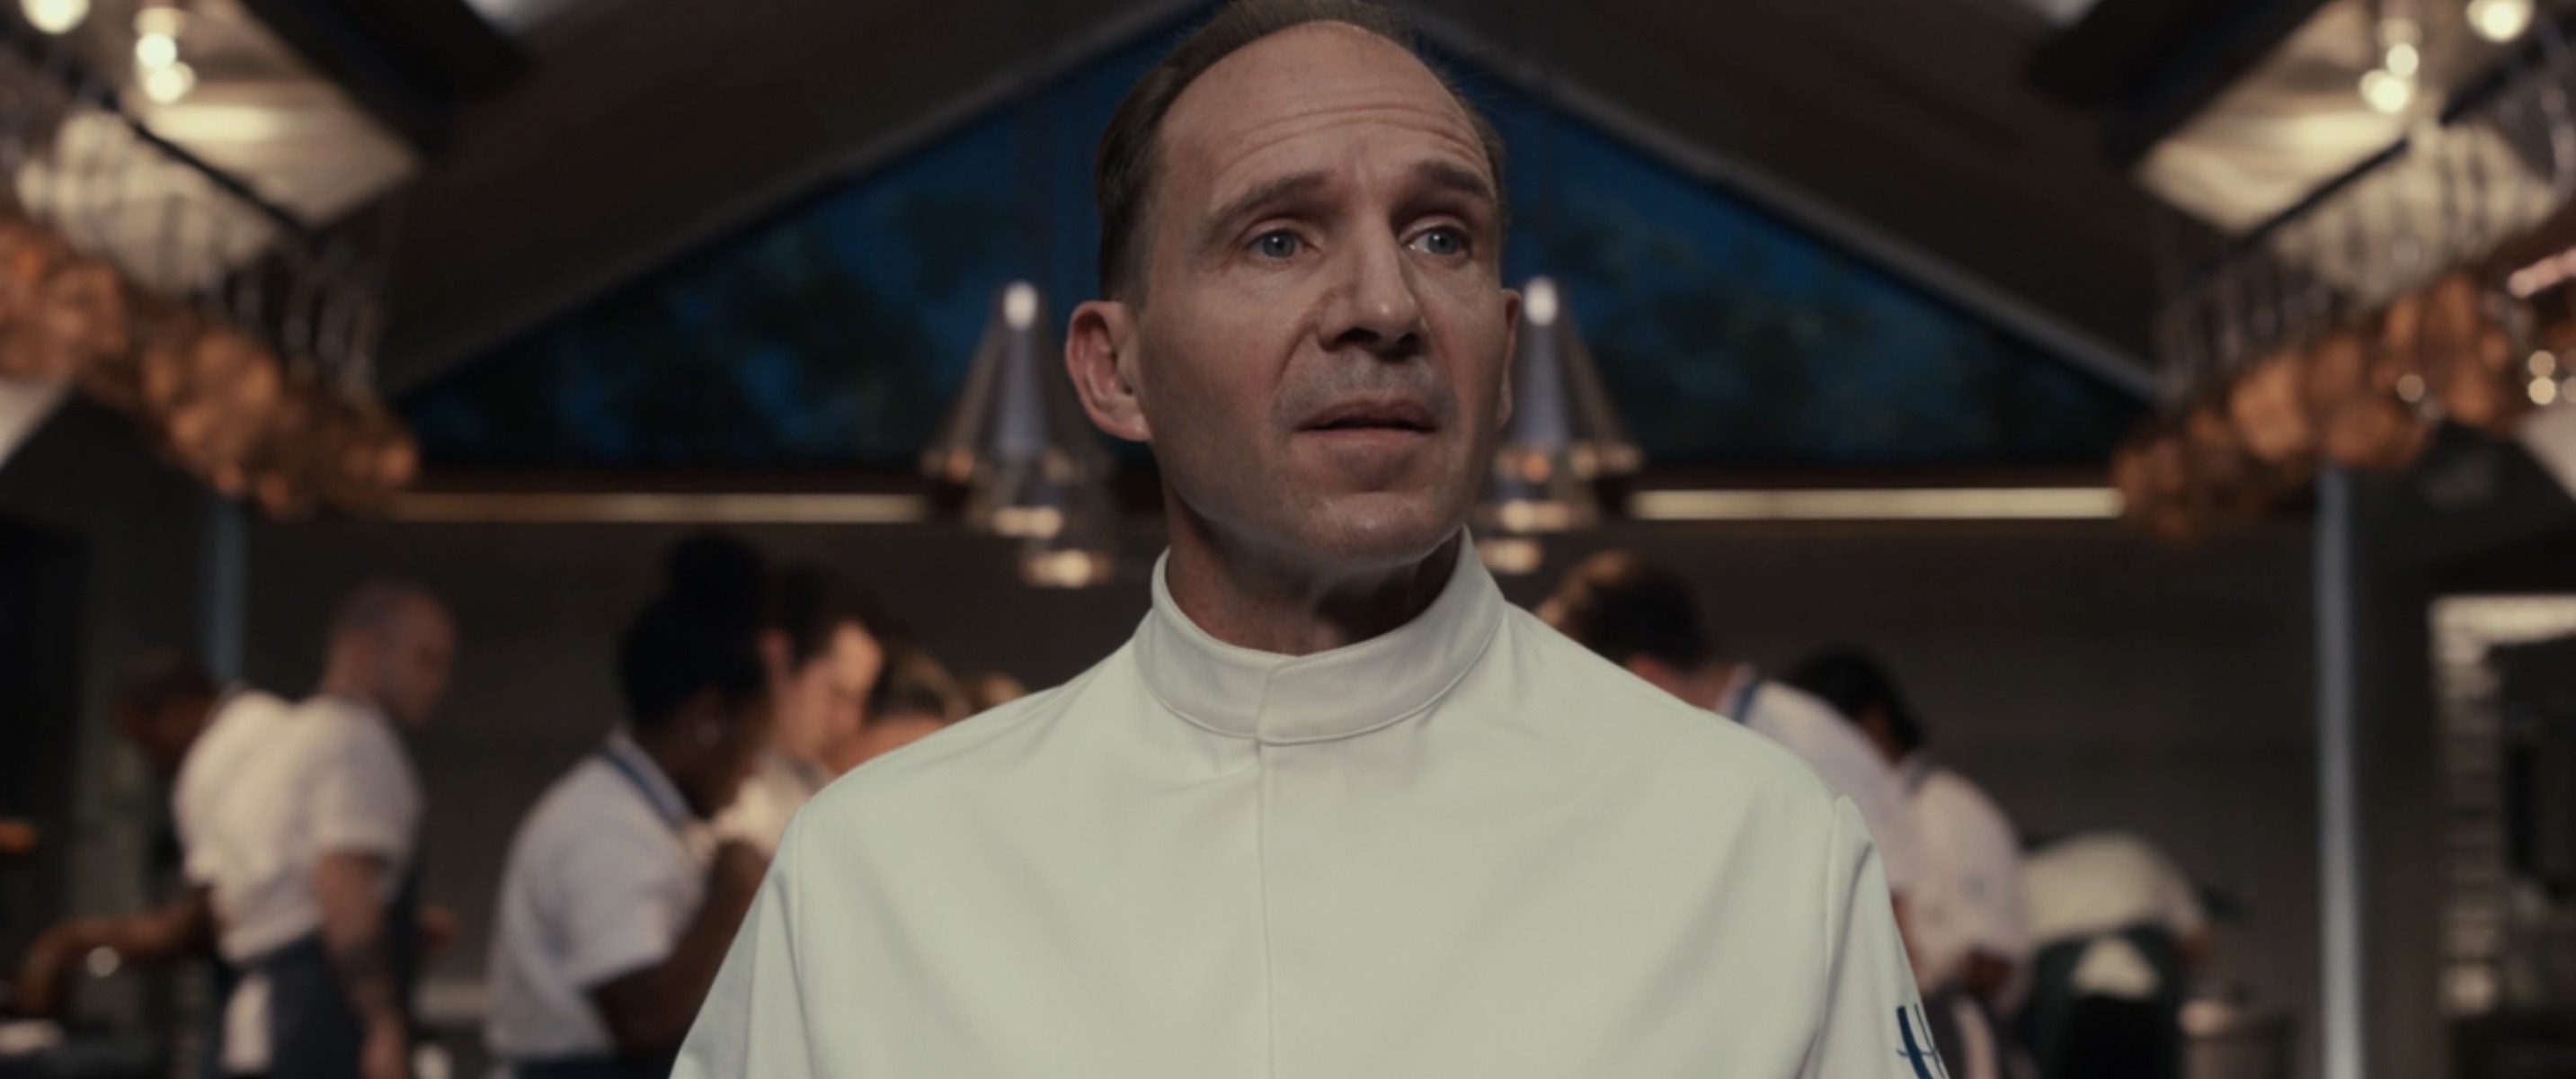 The Menu Cast on HBO Max - Ralph Fiennes as Chef Slowik